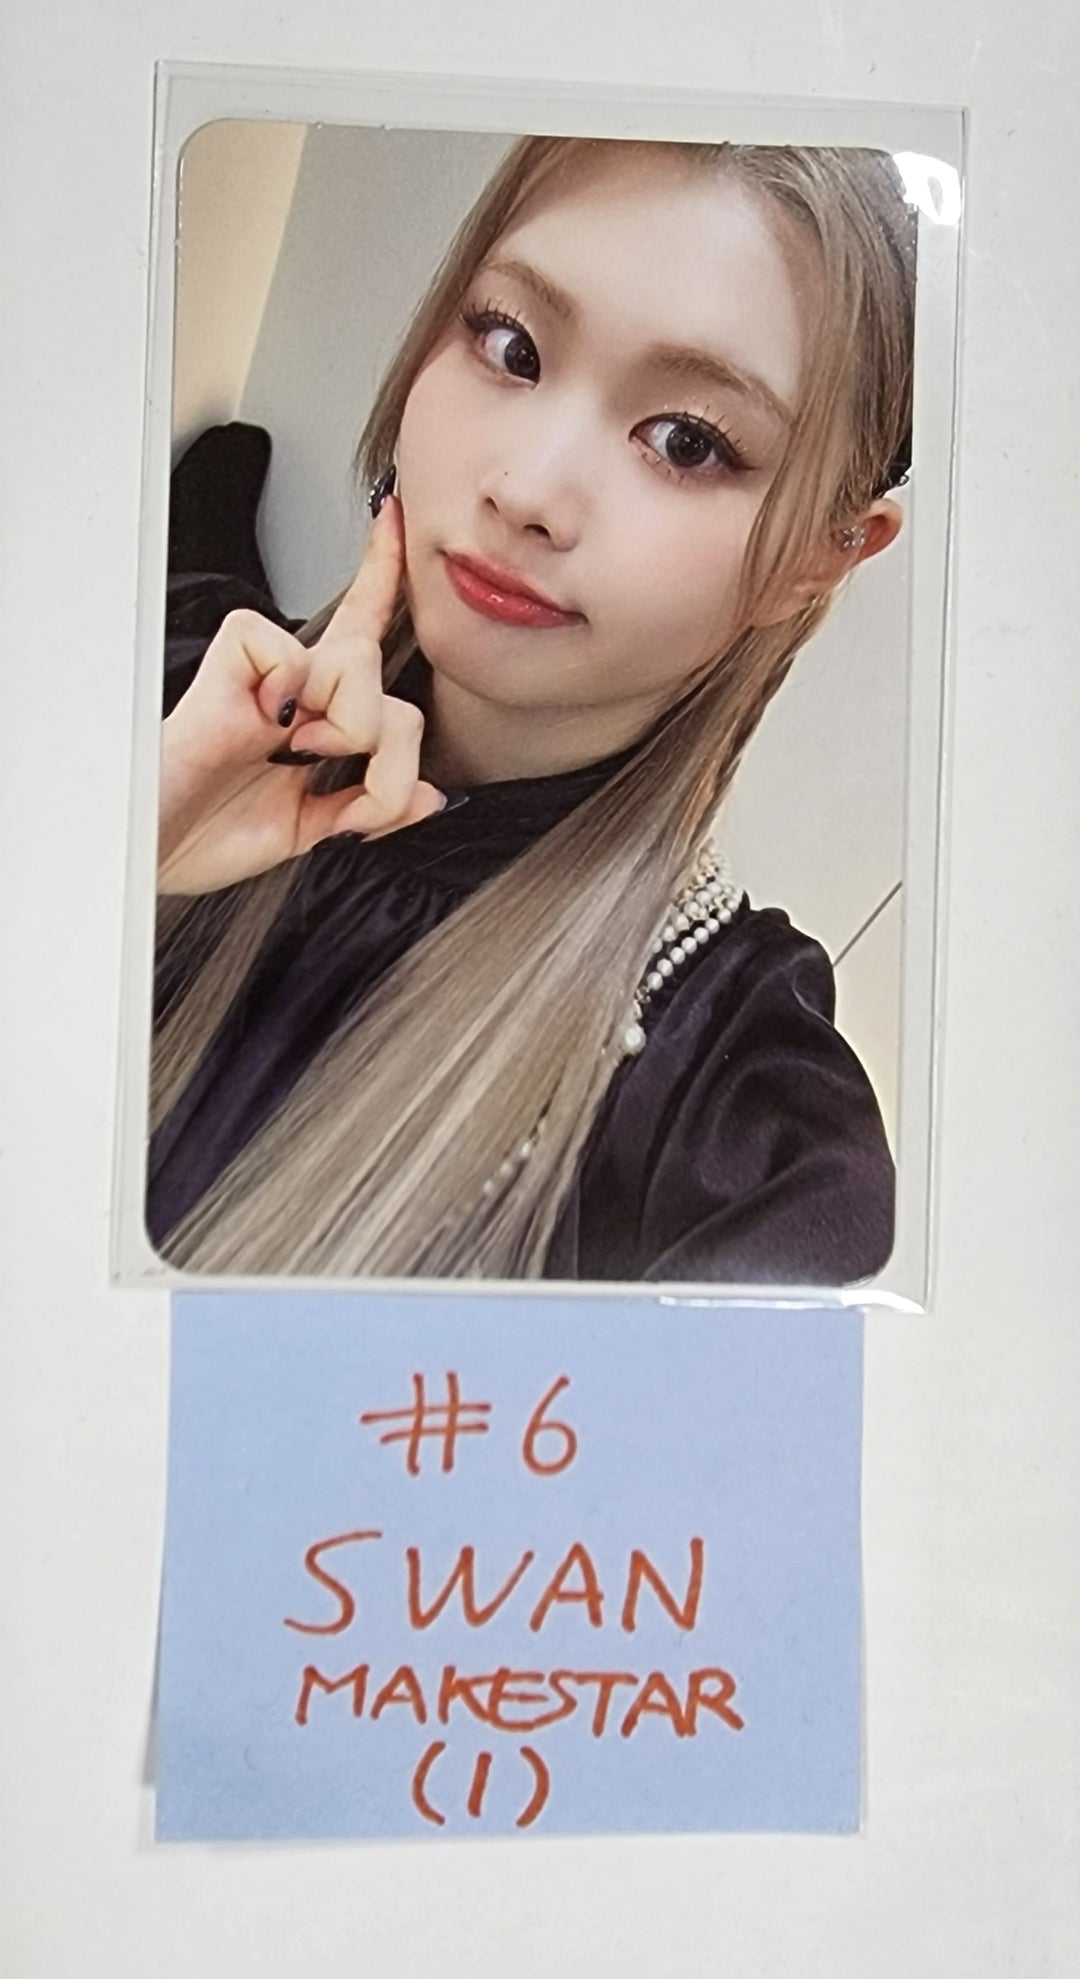 PURPLE KISS "Cabin Fever" - Makestar Fansign Event Photocard Round 5